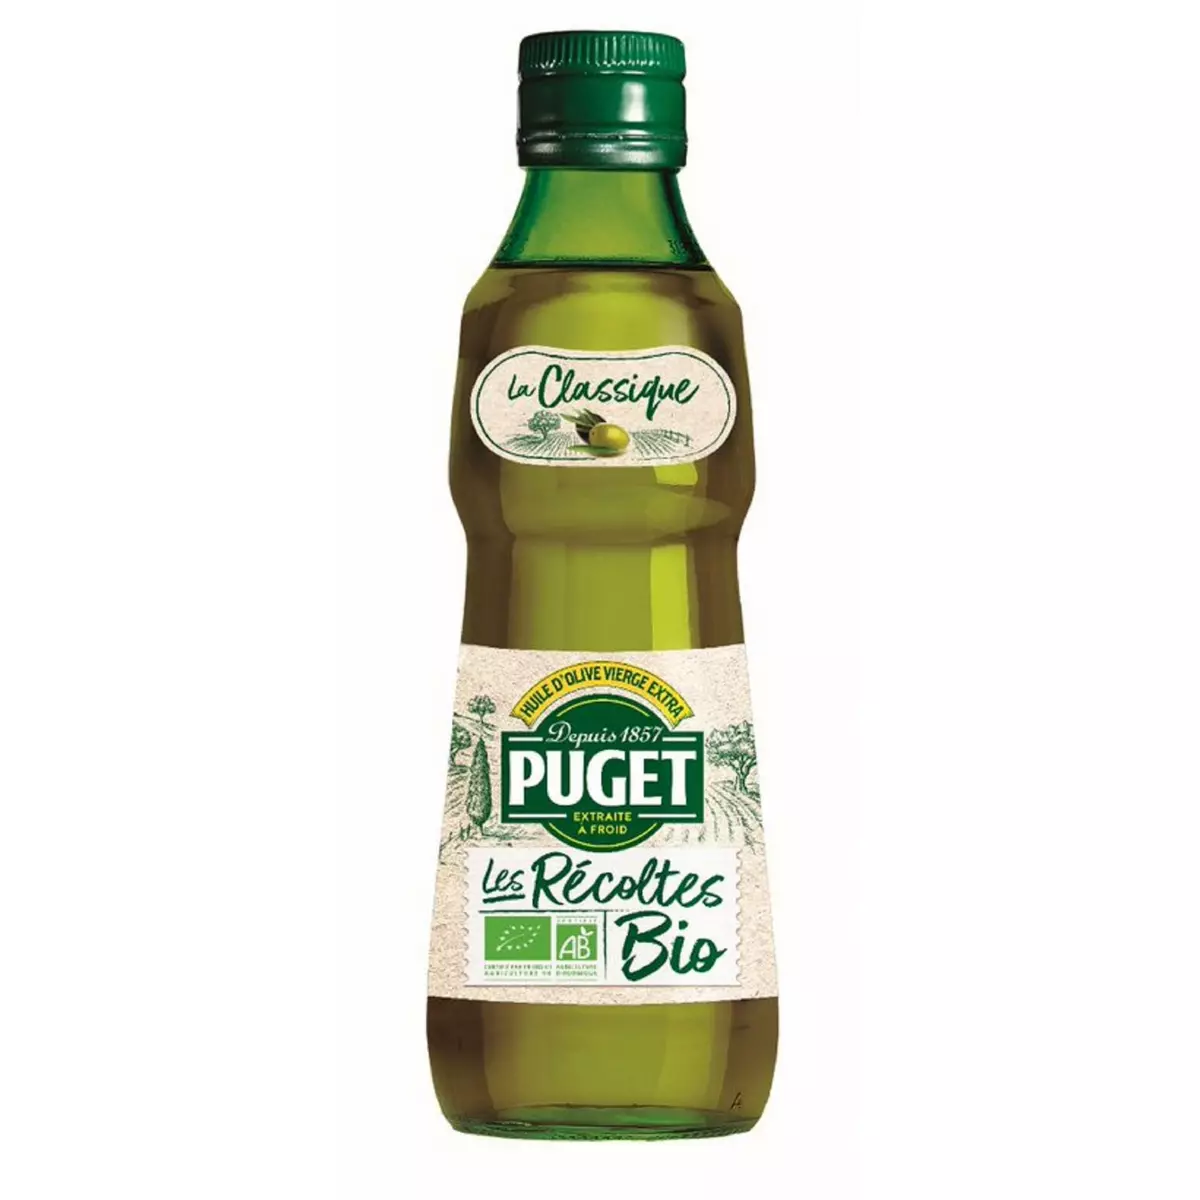 PUGET Huile d'olive vierge extra bio 25cl